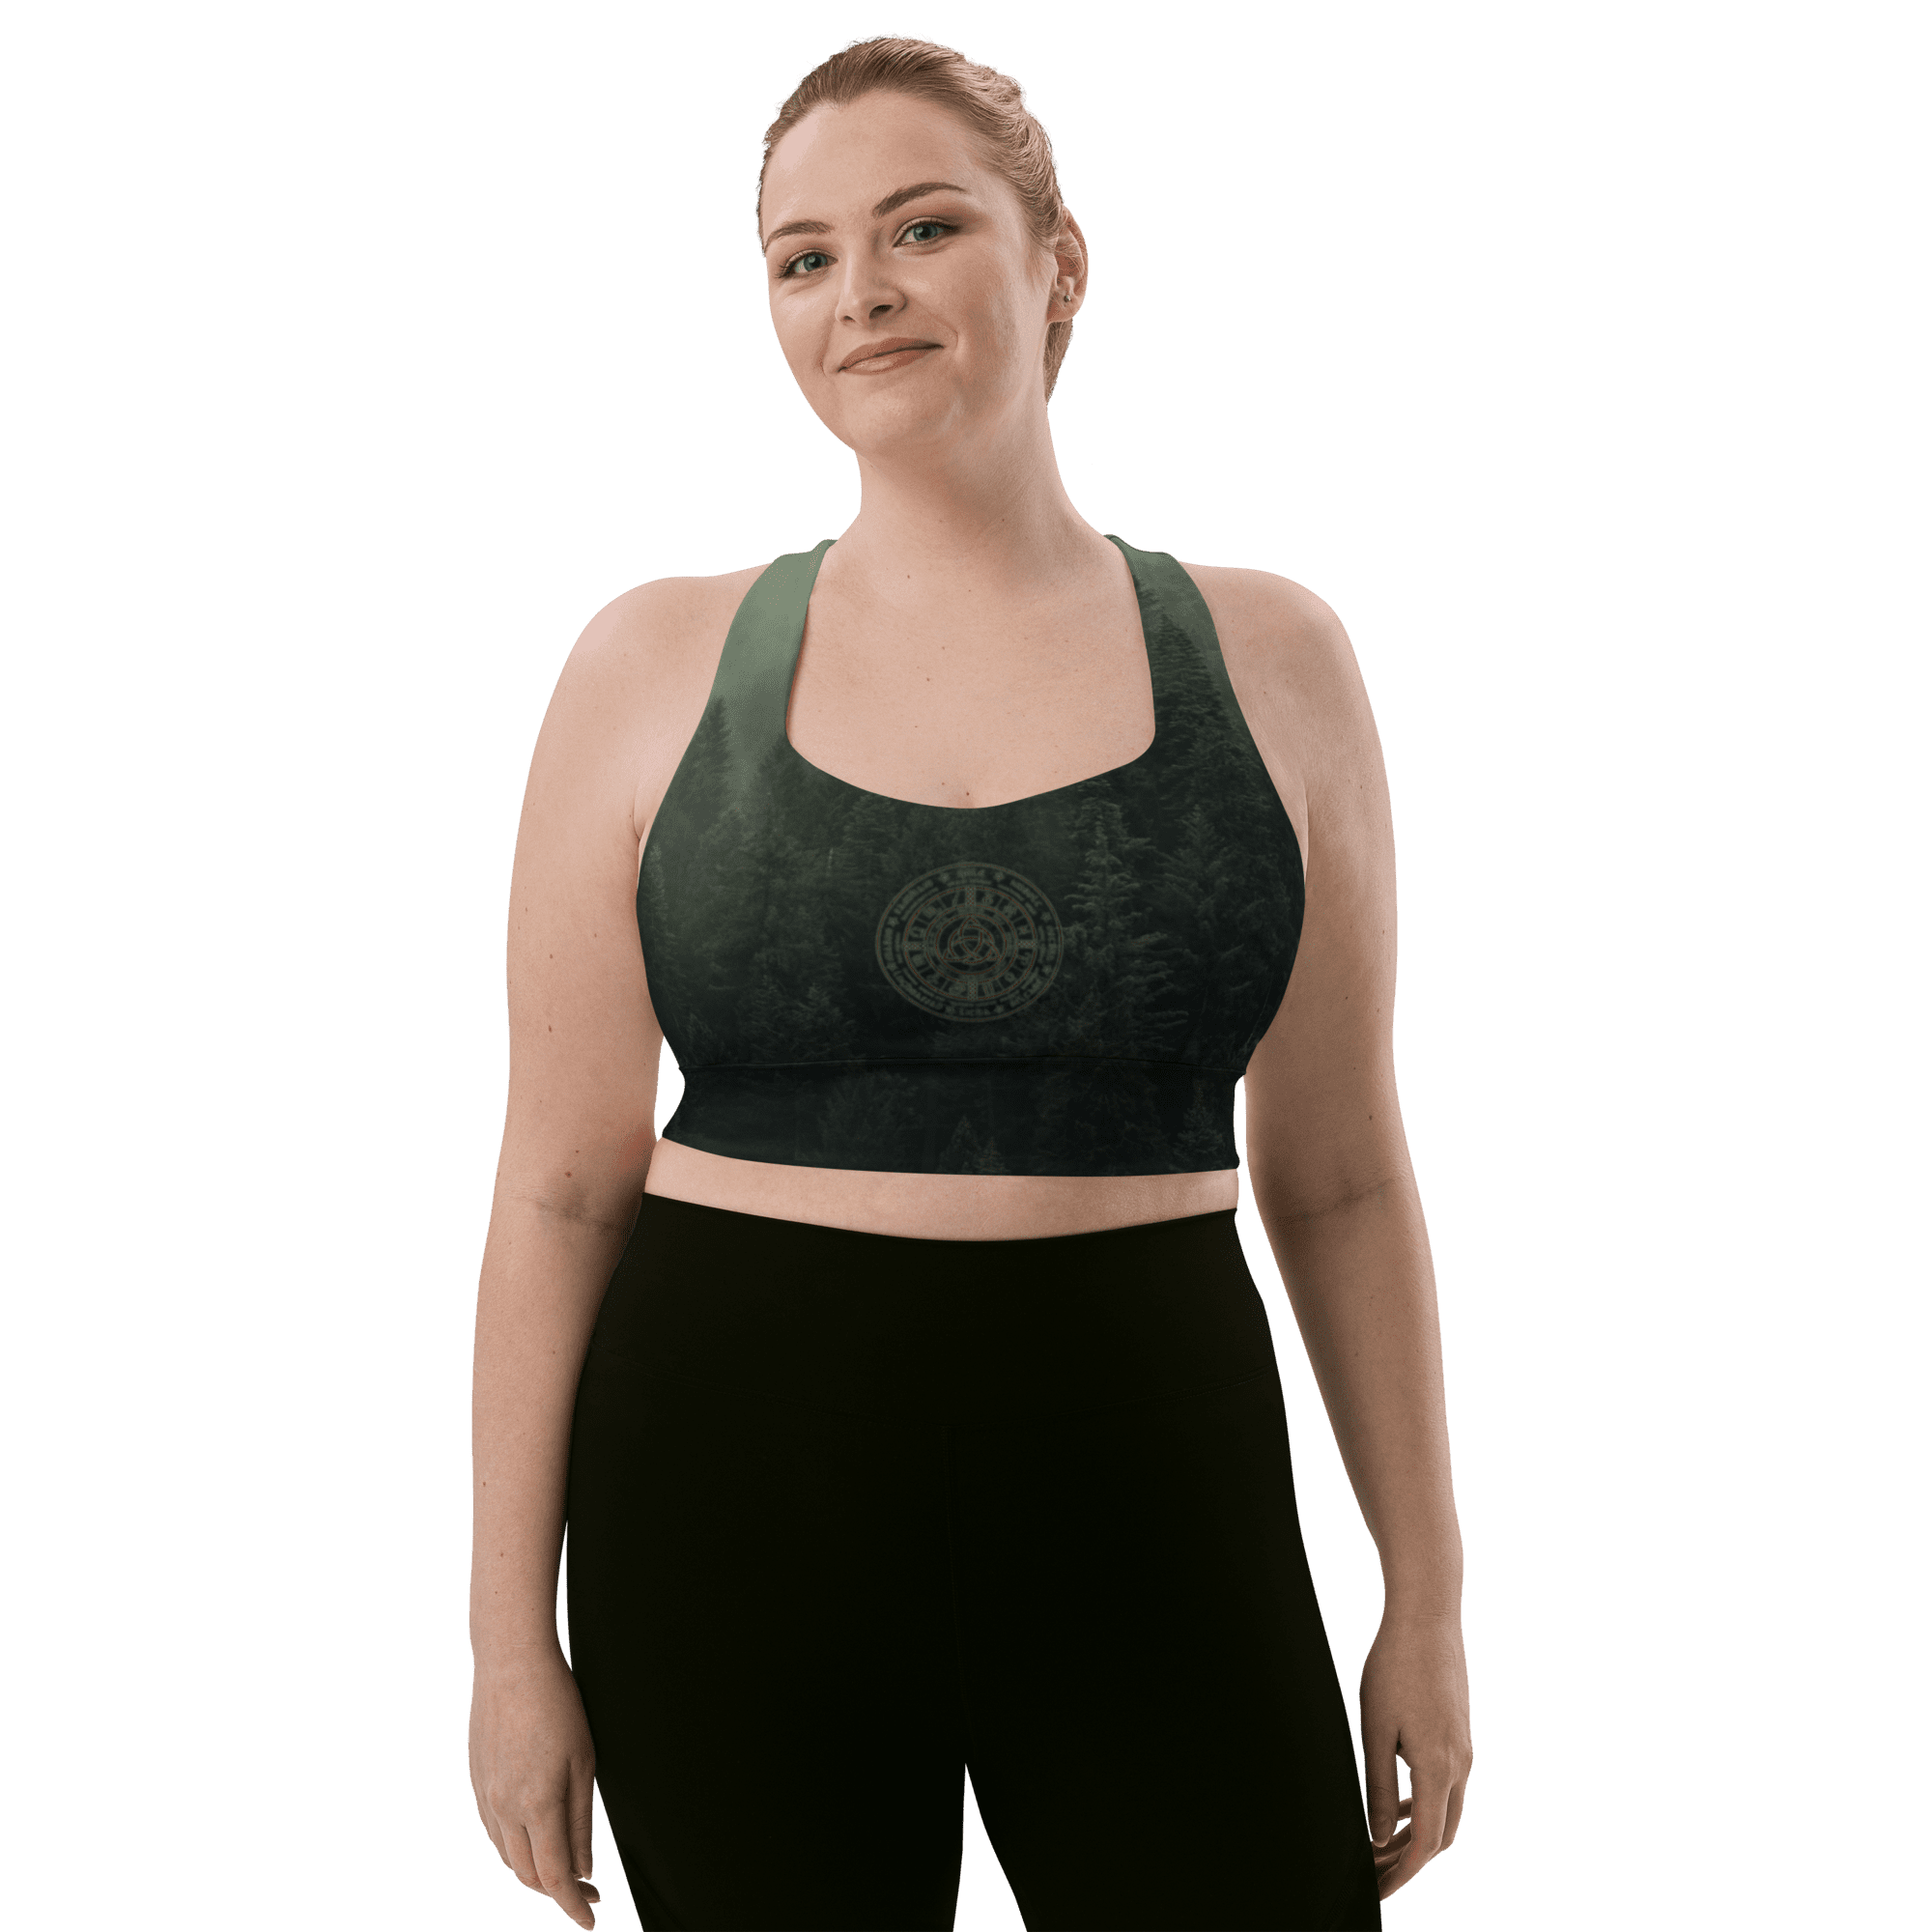 https://www.equinox-apothecary.shop/wp-content/uploads/2022/08/longline-sports-bra-wheel-of-the-year-woodland-serenity-4.png